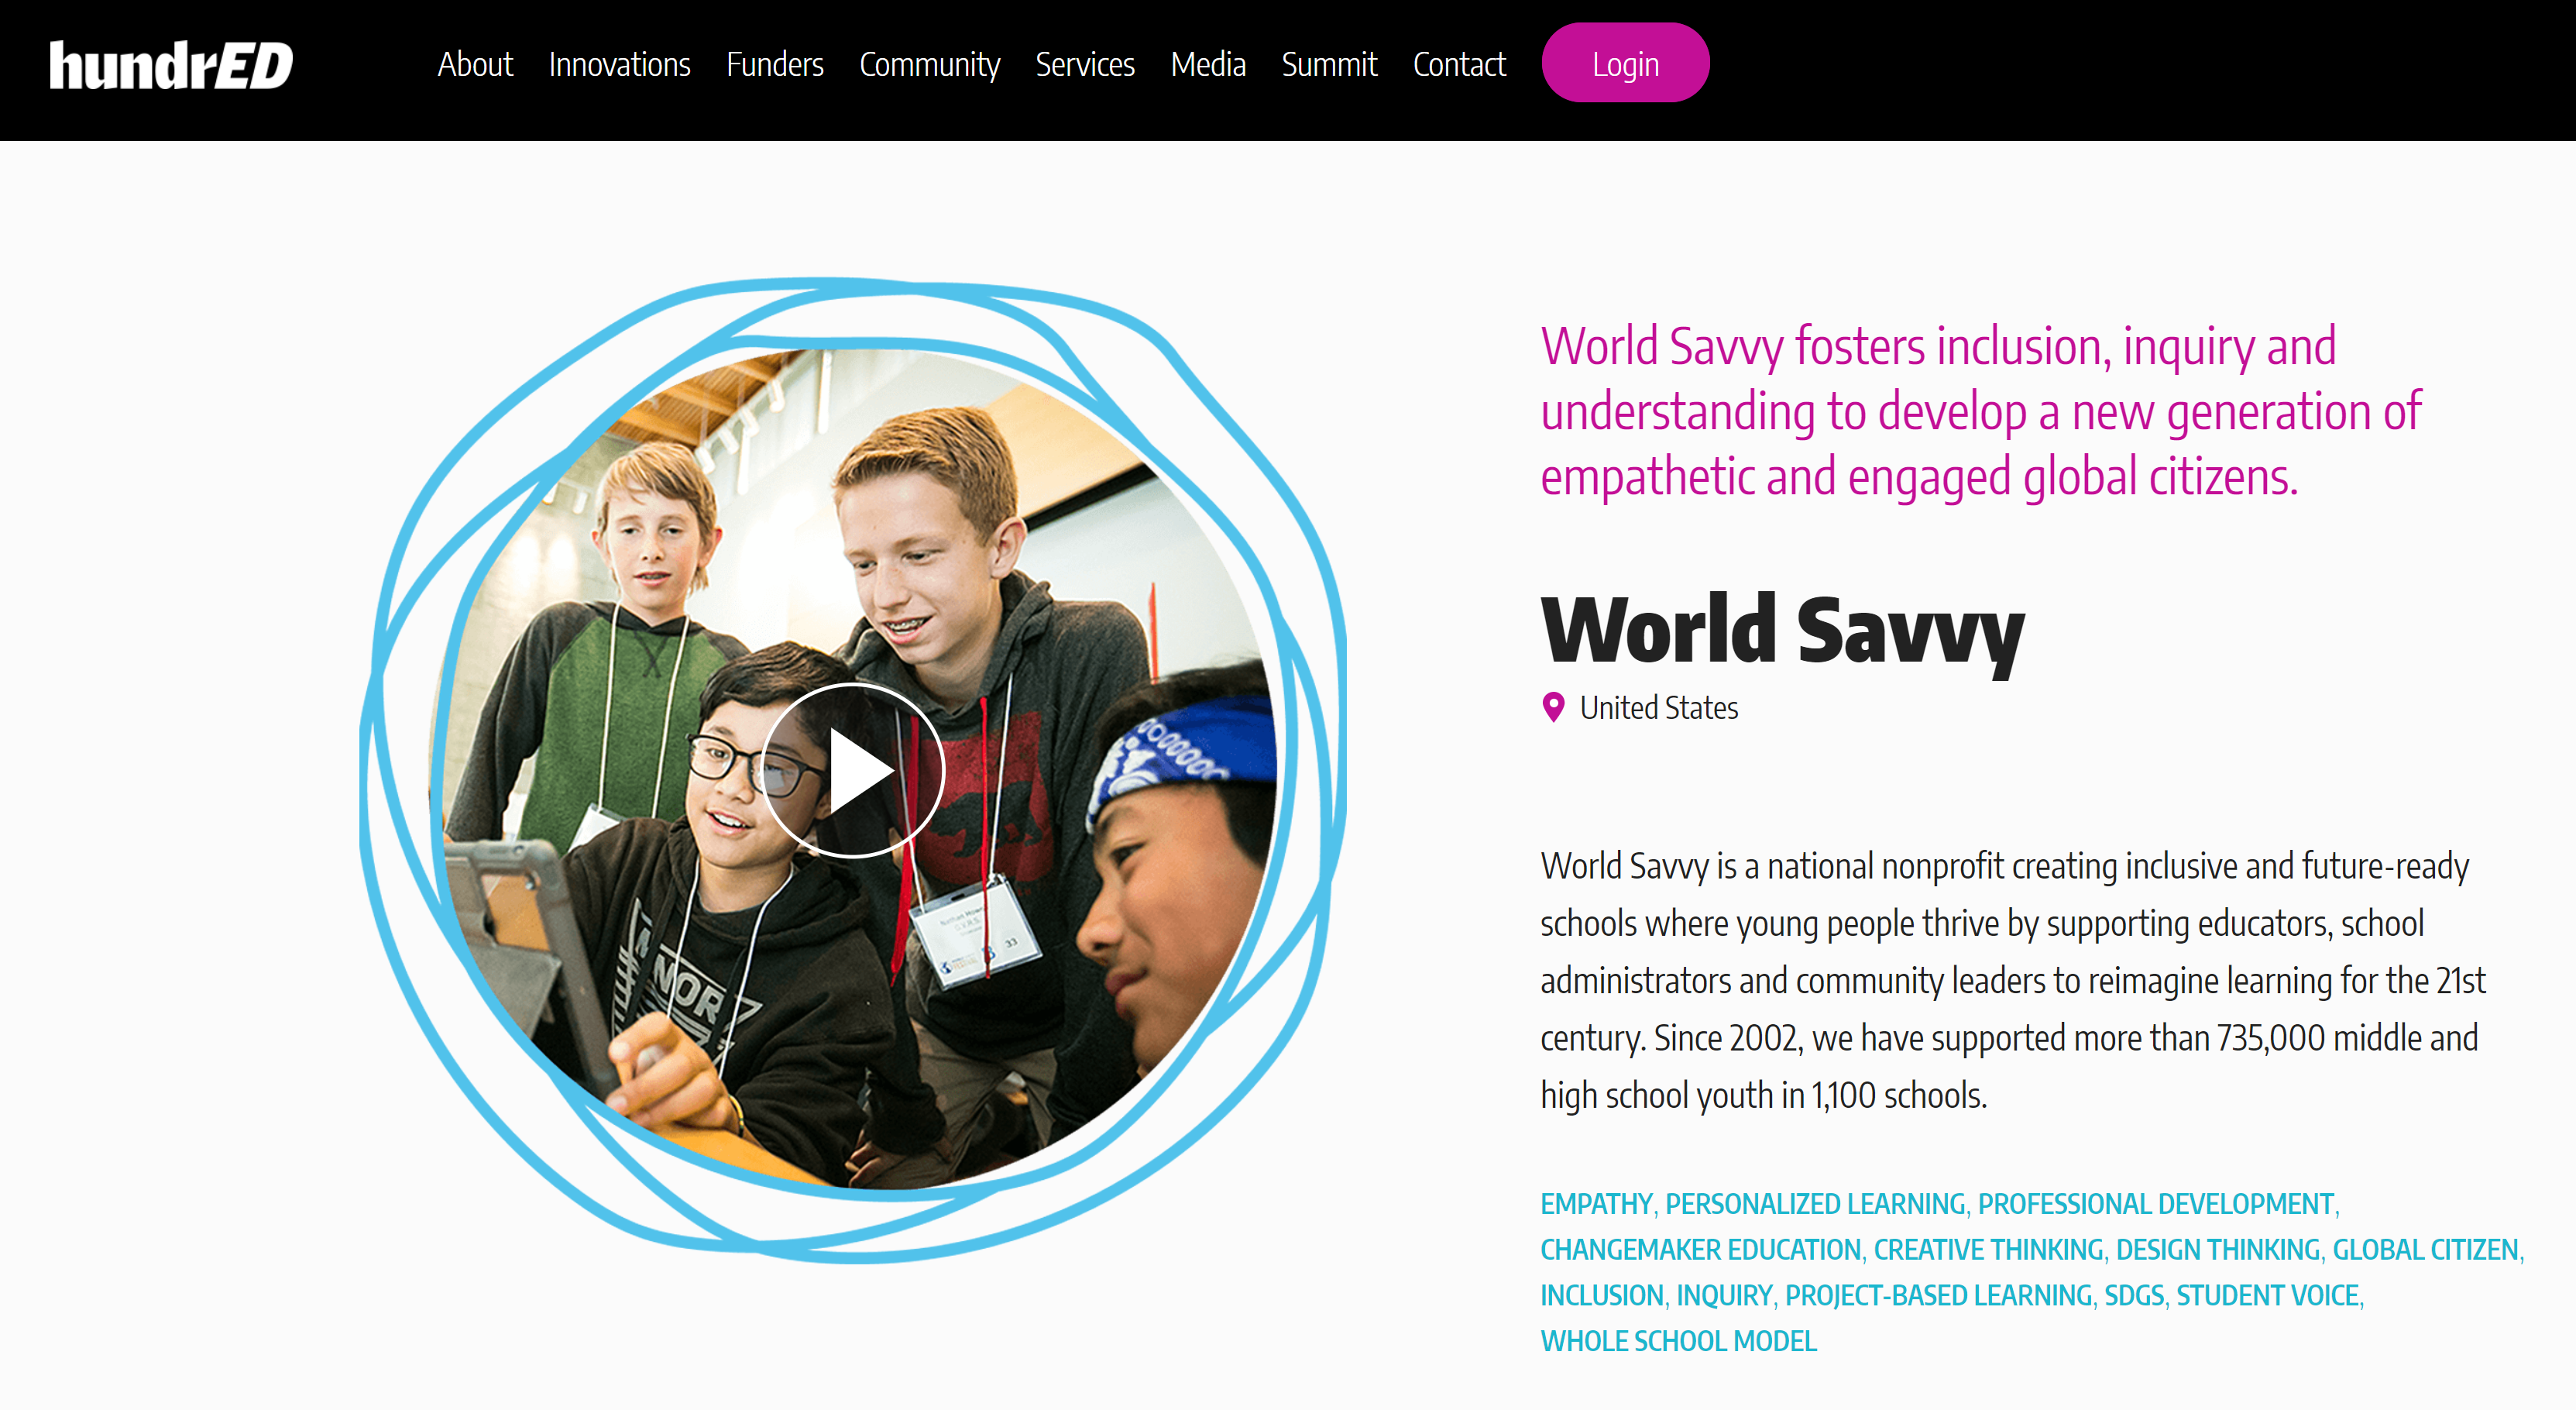 World Savvy featured on HundrED as one of their Education Innovations!